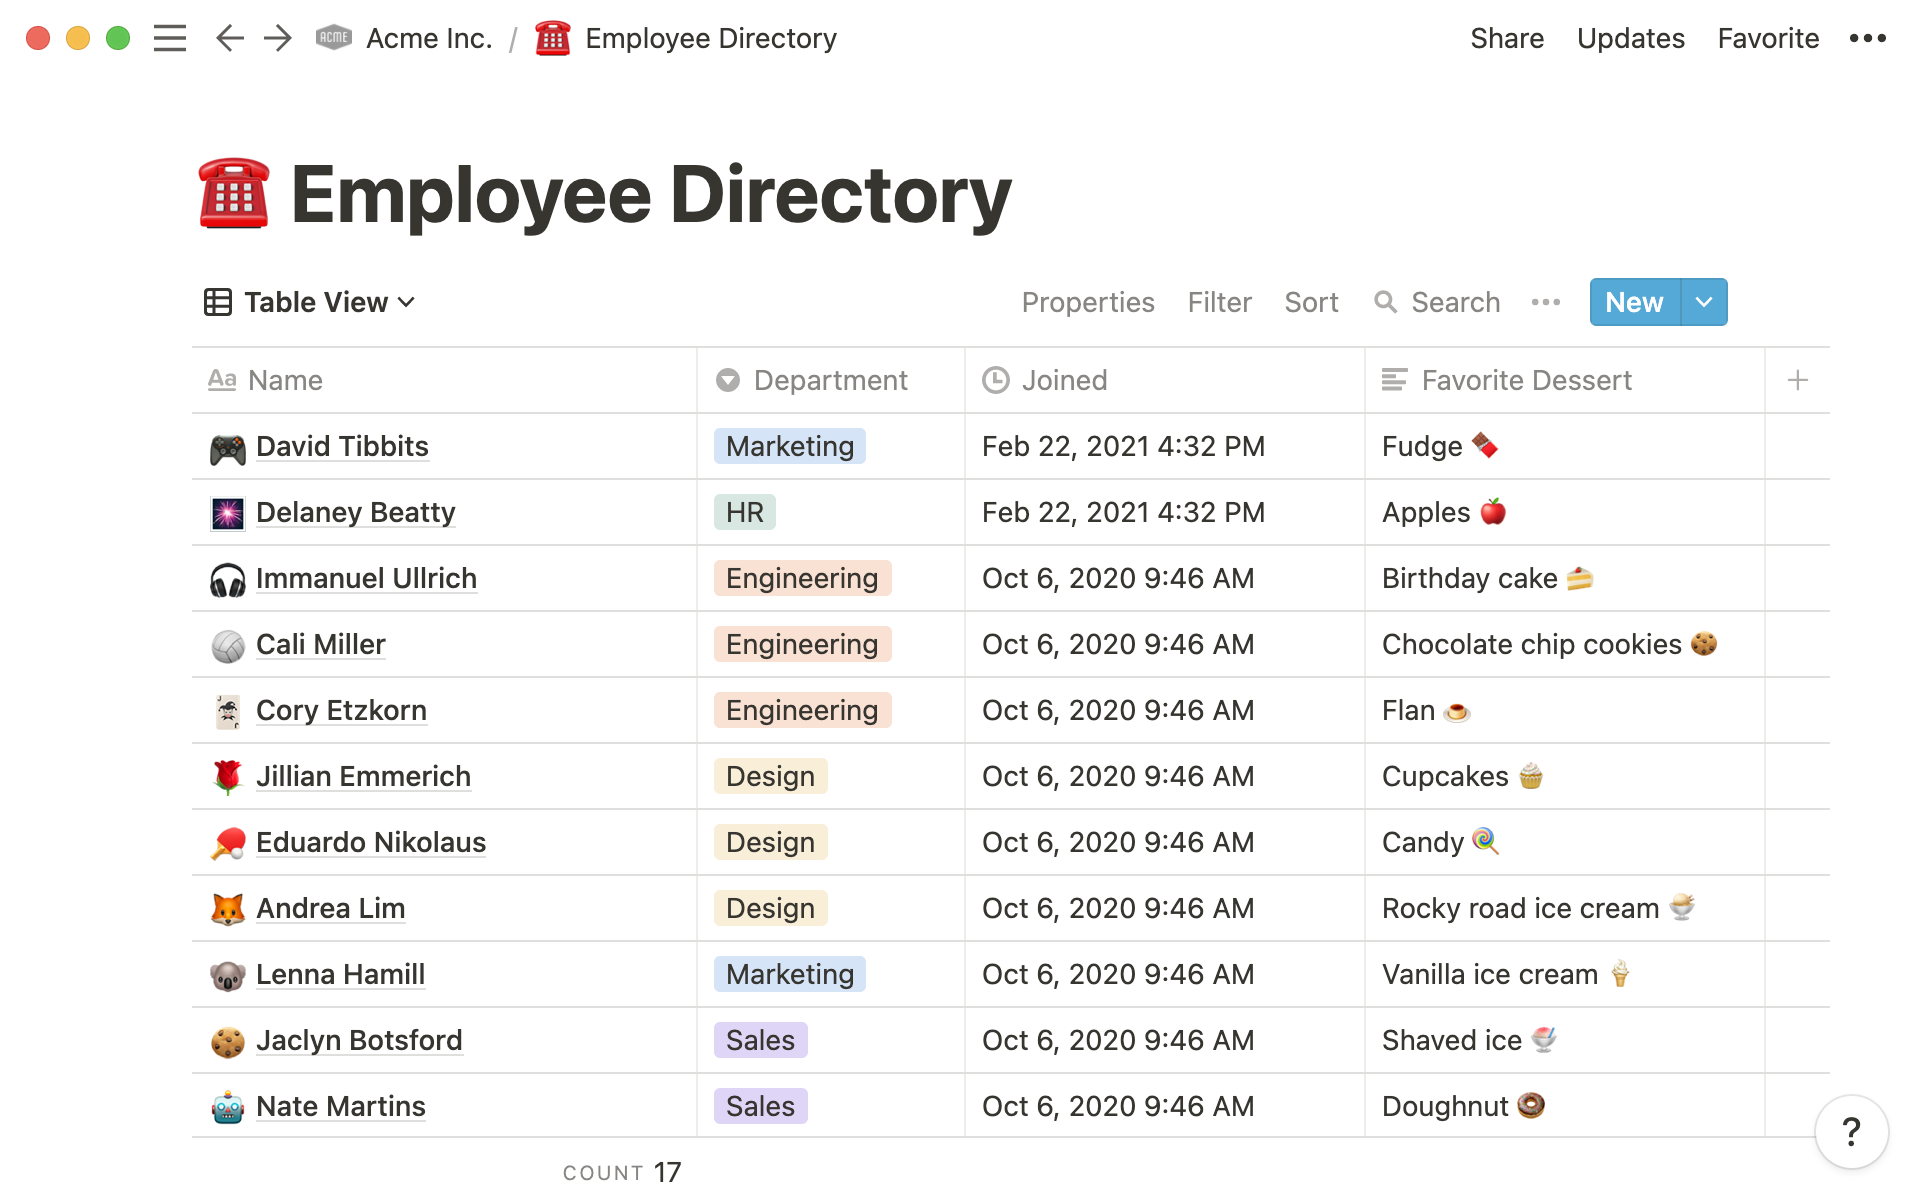 This employee directory uses the Create time property to note when employees joined the company.